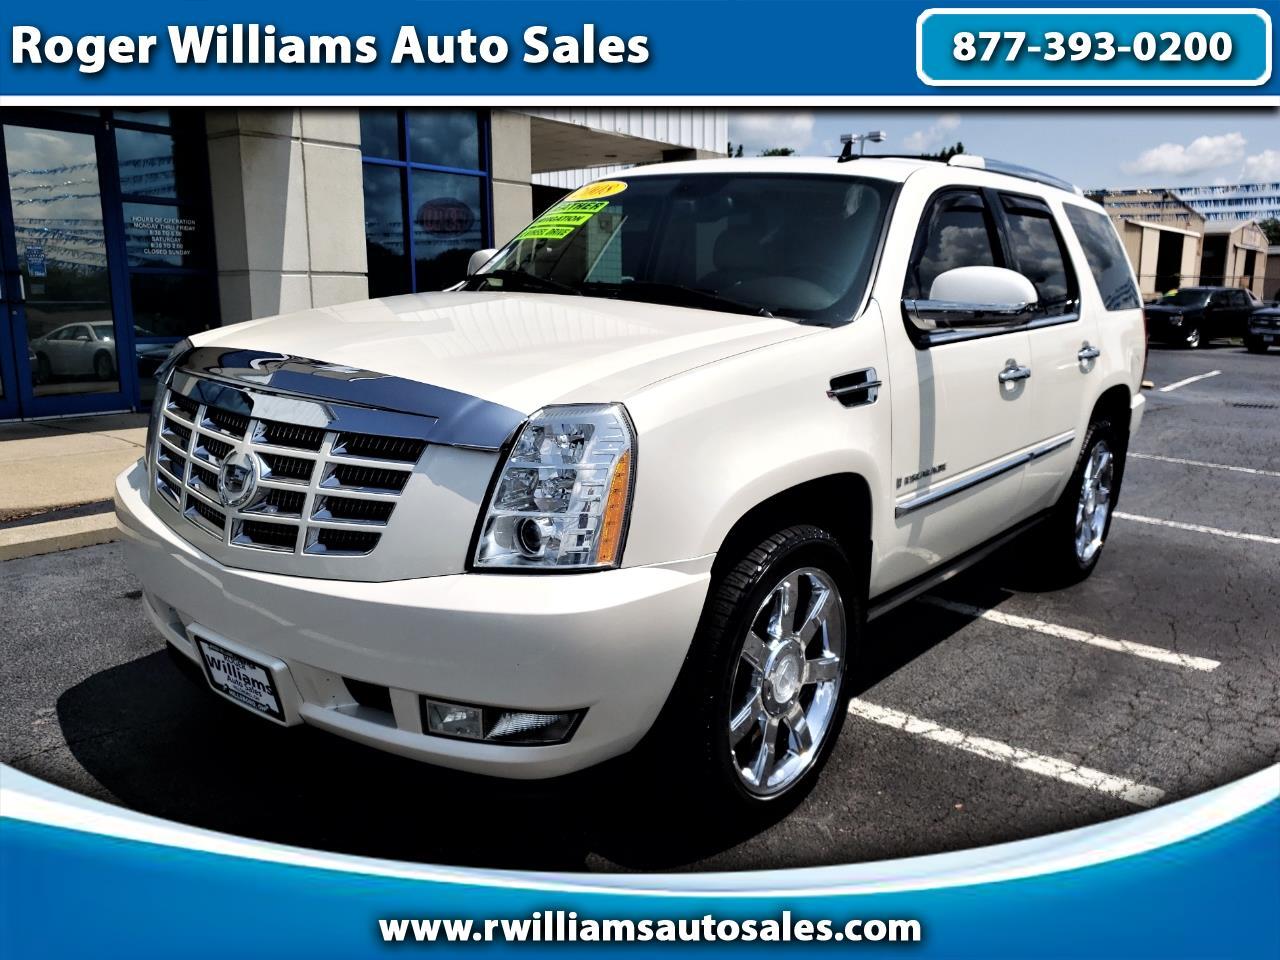 Used 2008 Cadillac Escalade AWD 4dr for Sale in Hillsboro OH 45133